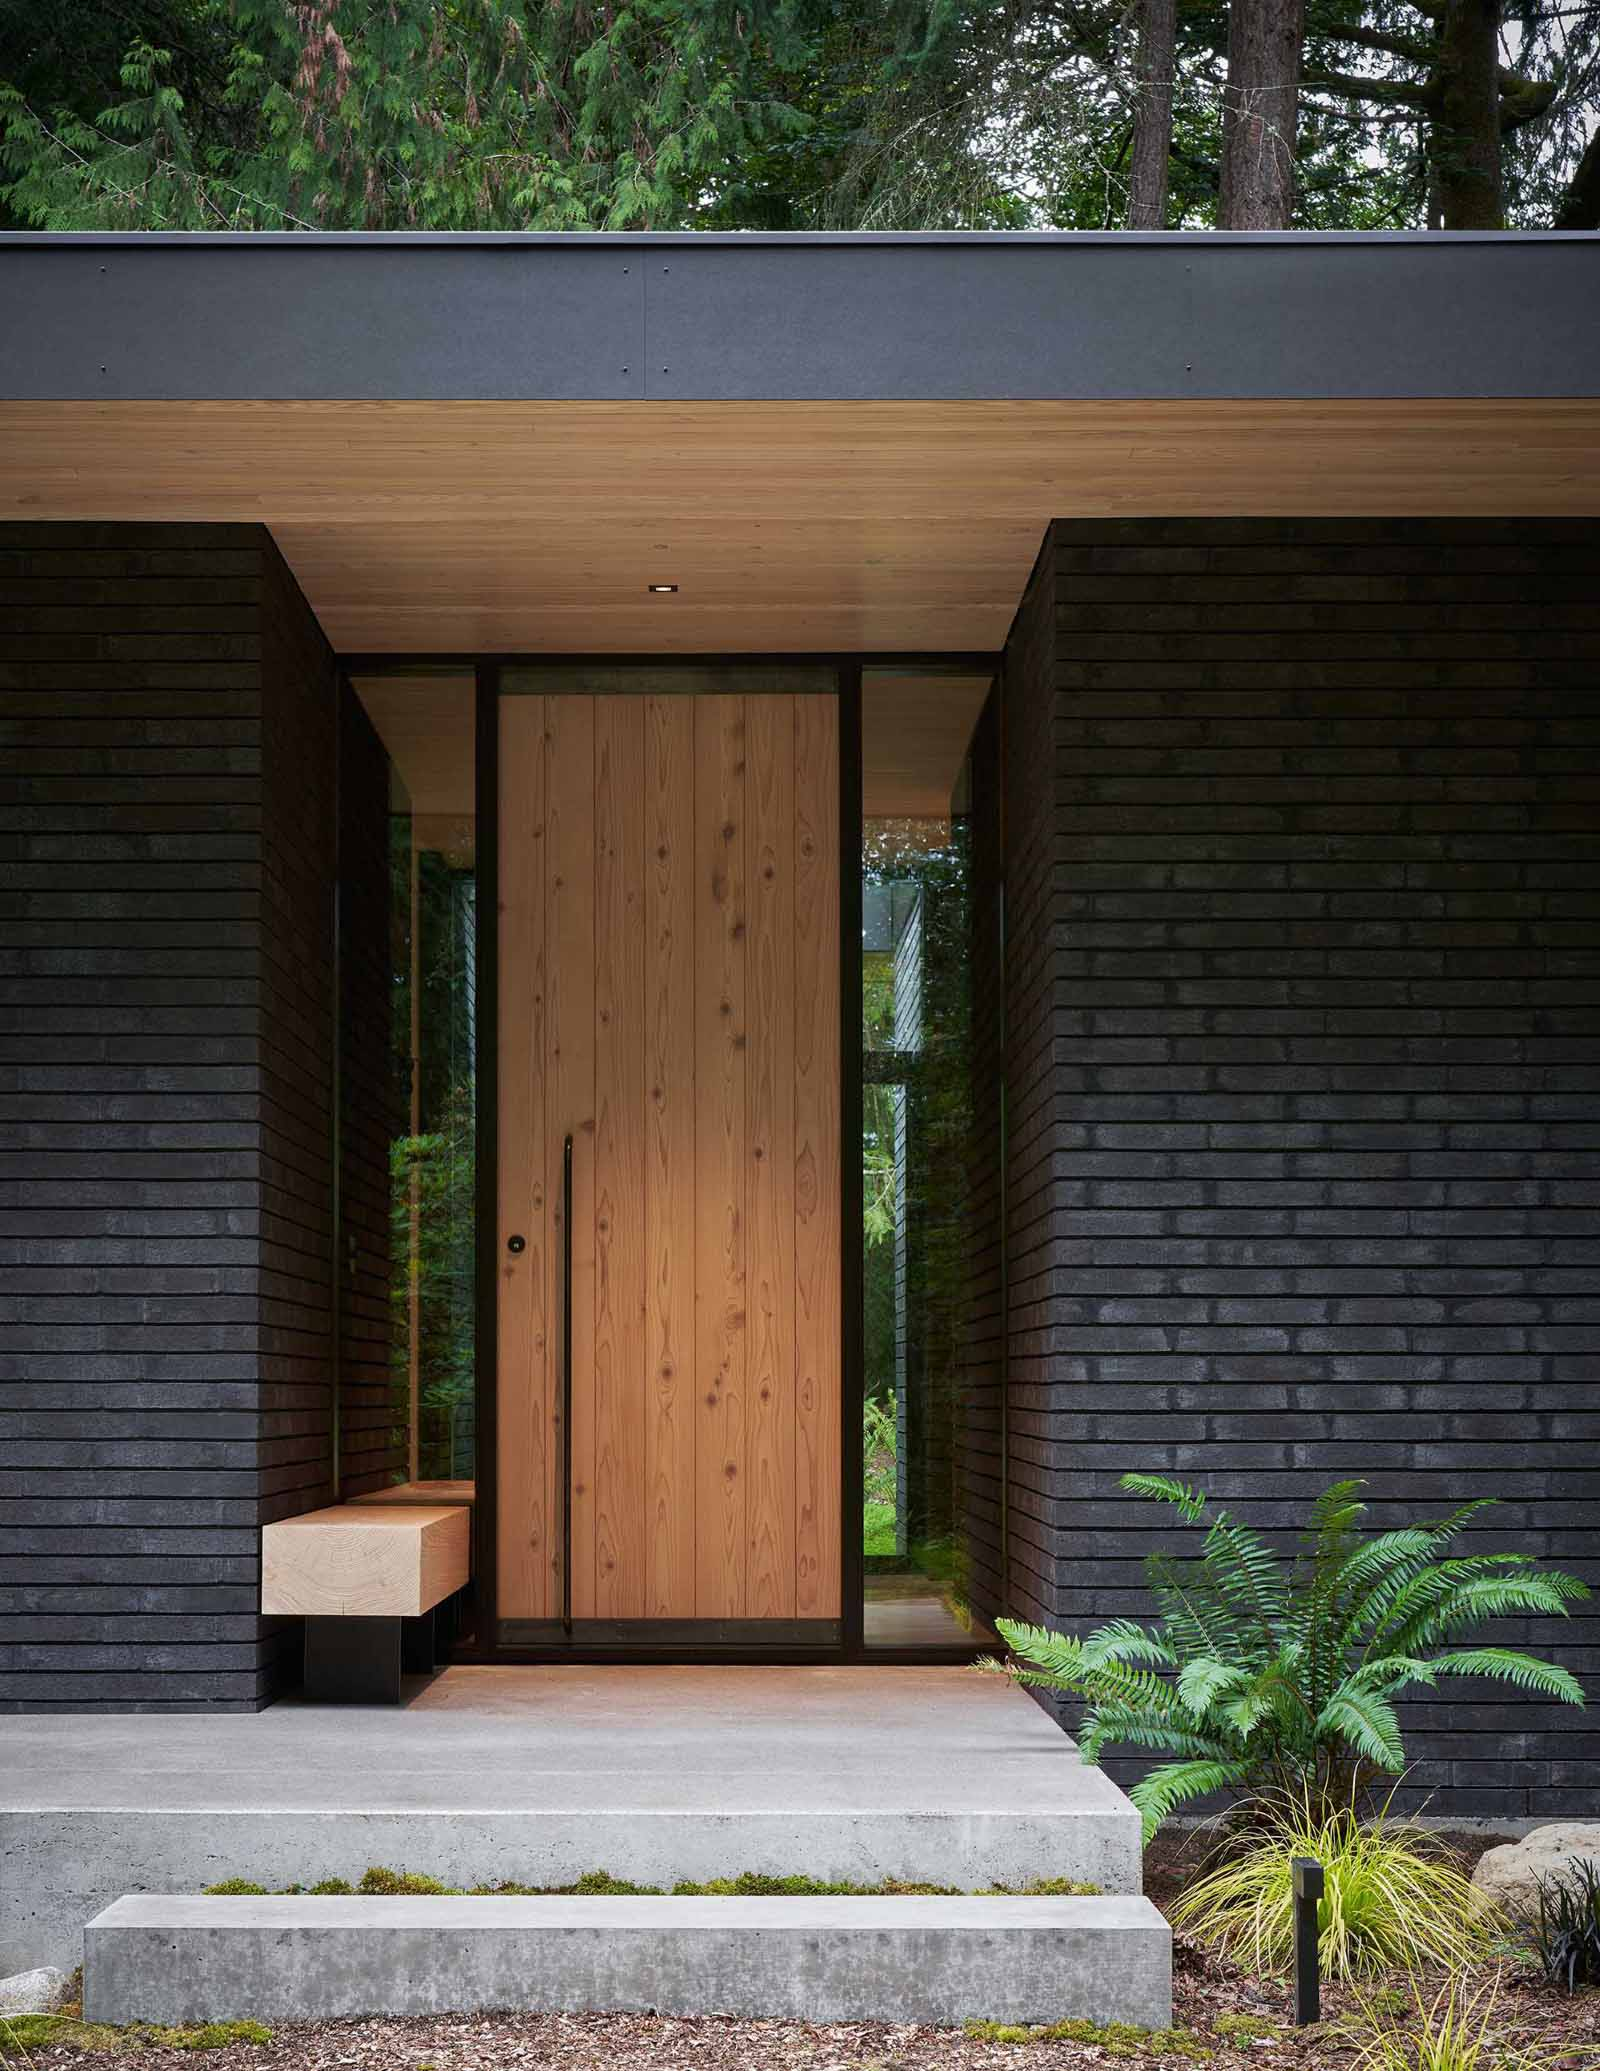 Modern Brick Home With Garden Elegant Brick Residence Embraces Nature’s Beauty in Stylish Garden Setting